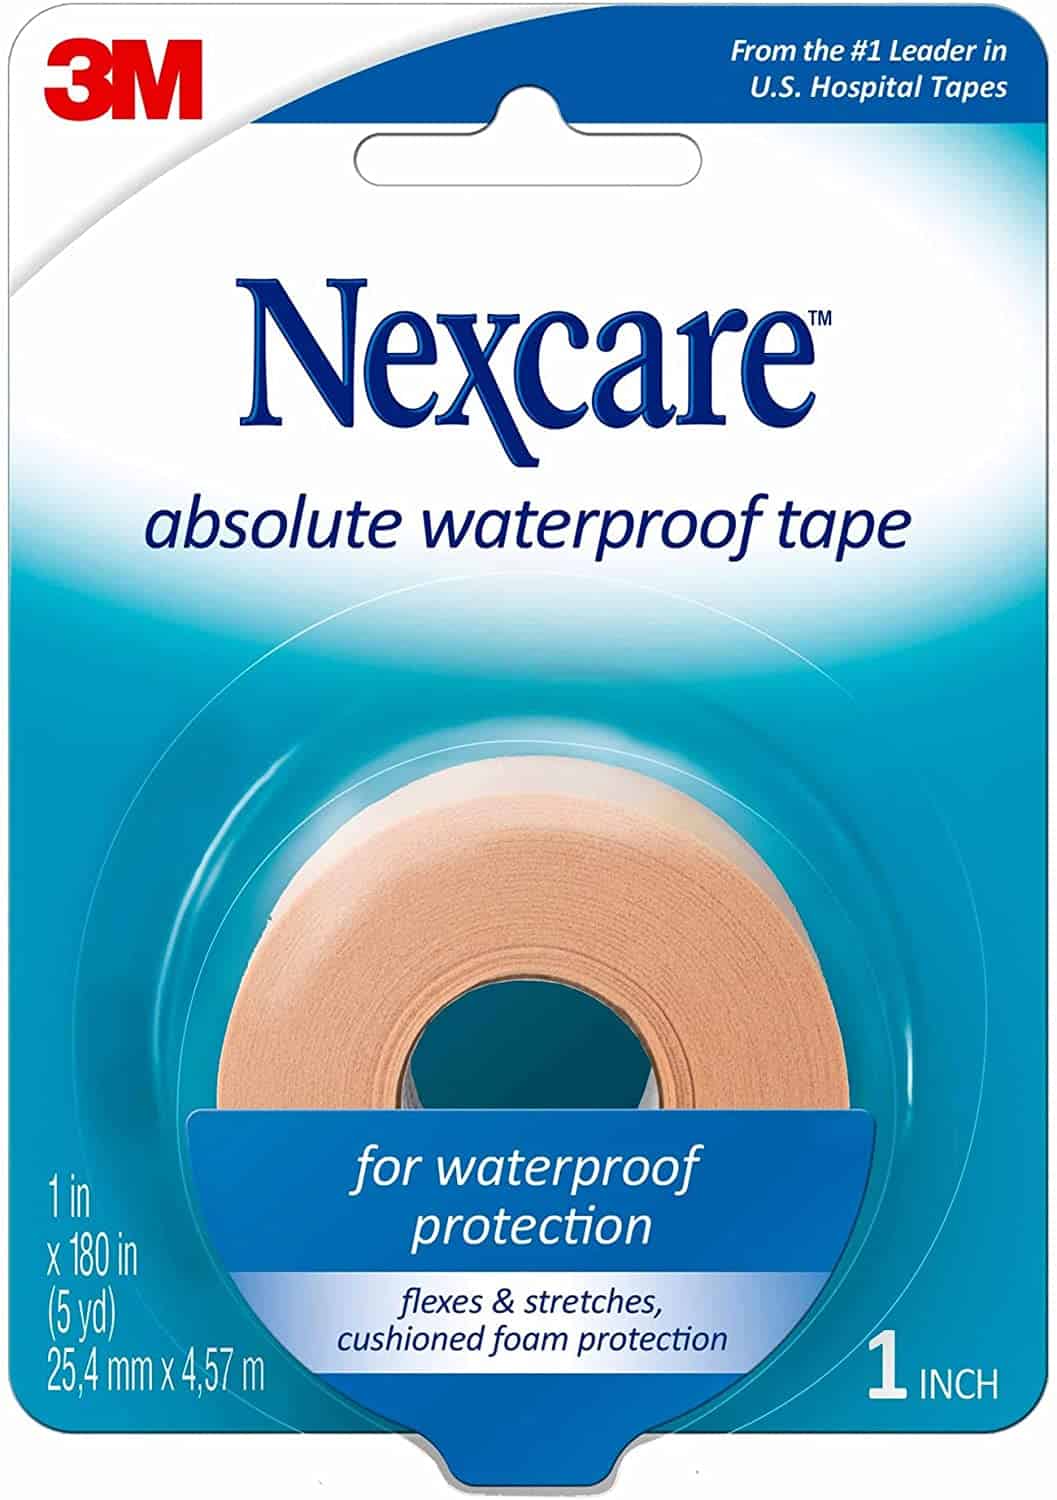 Best waterproof tape for first aid and medical applications- Nexcare Absolute Waterproof First Aid Tape